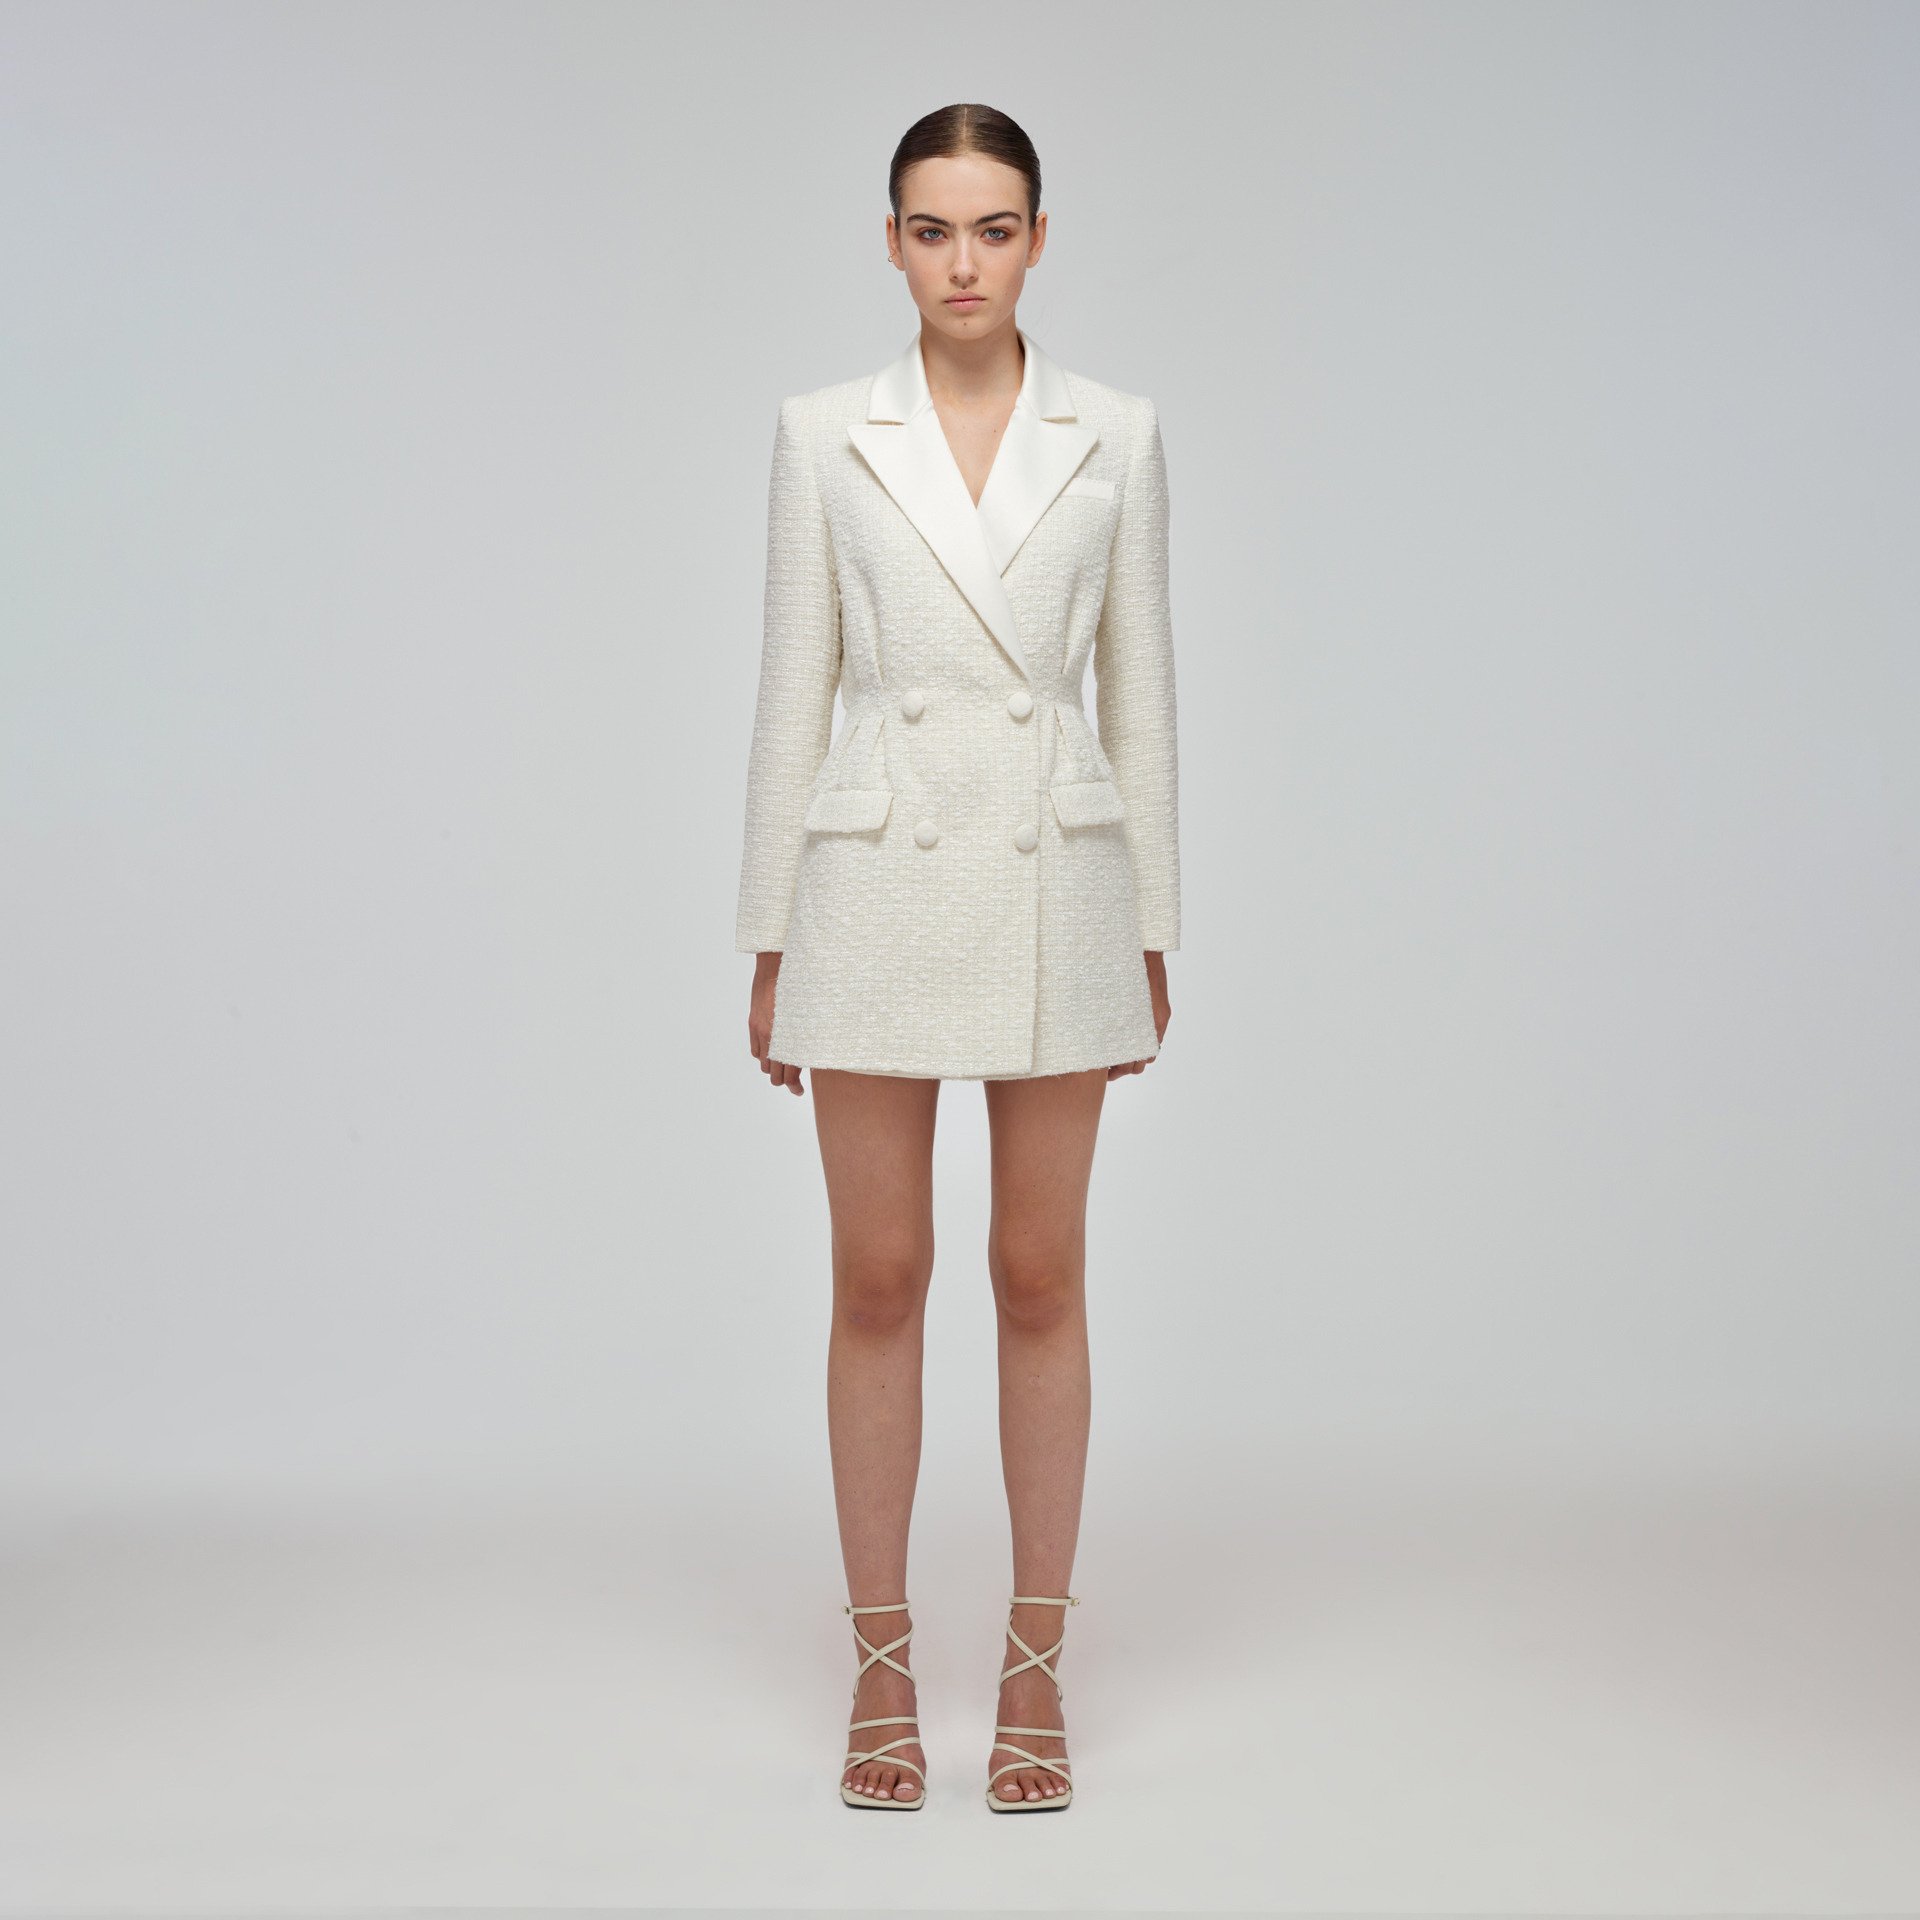 A blazer style white dress for a bridal shower from Self Portrait.